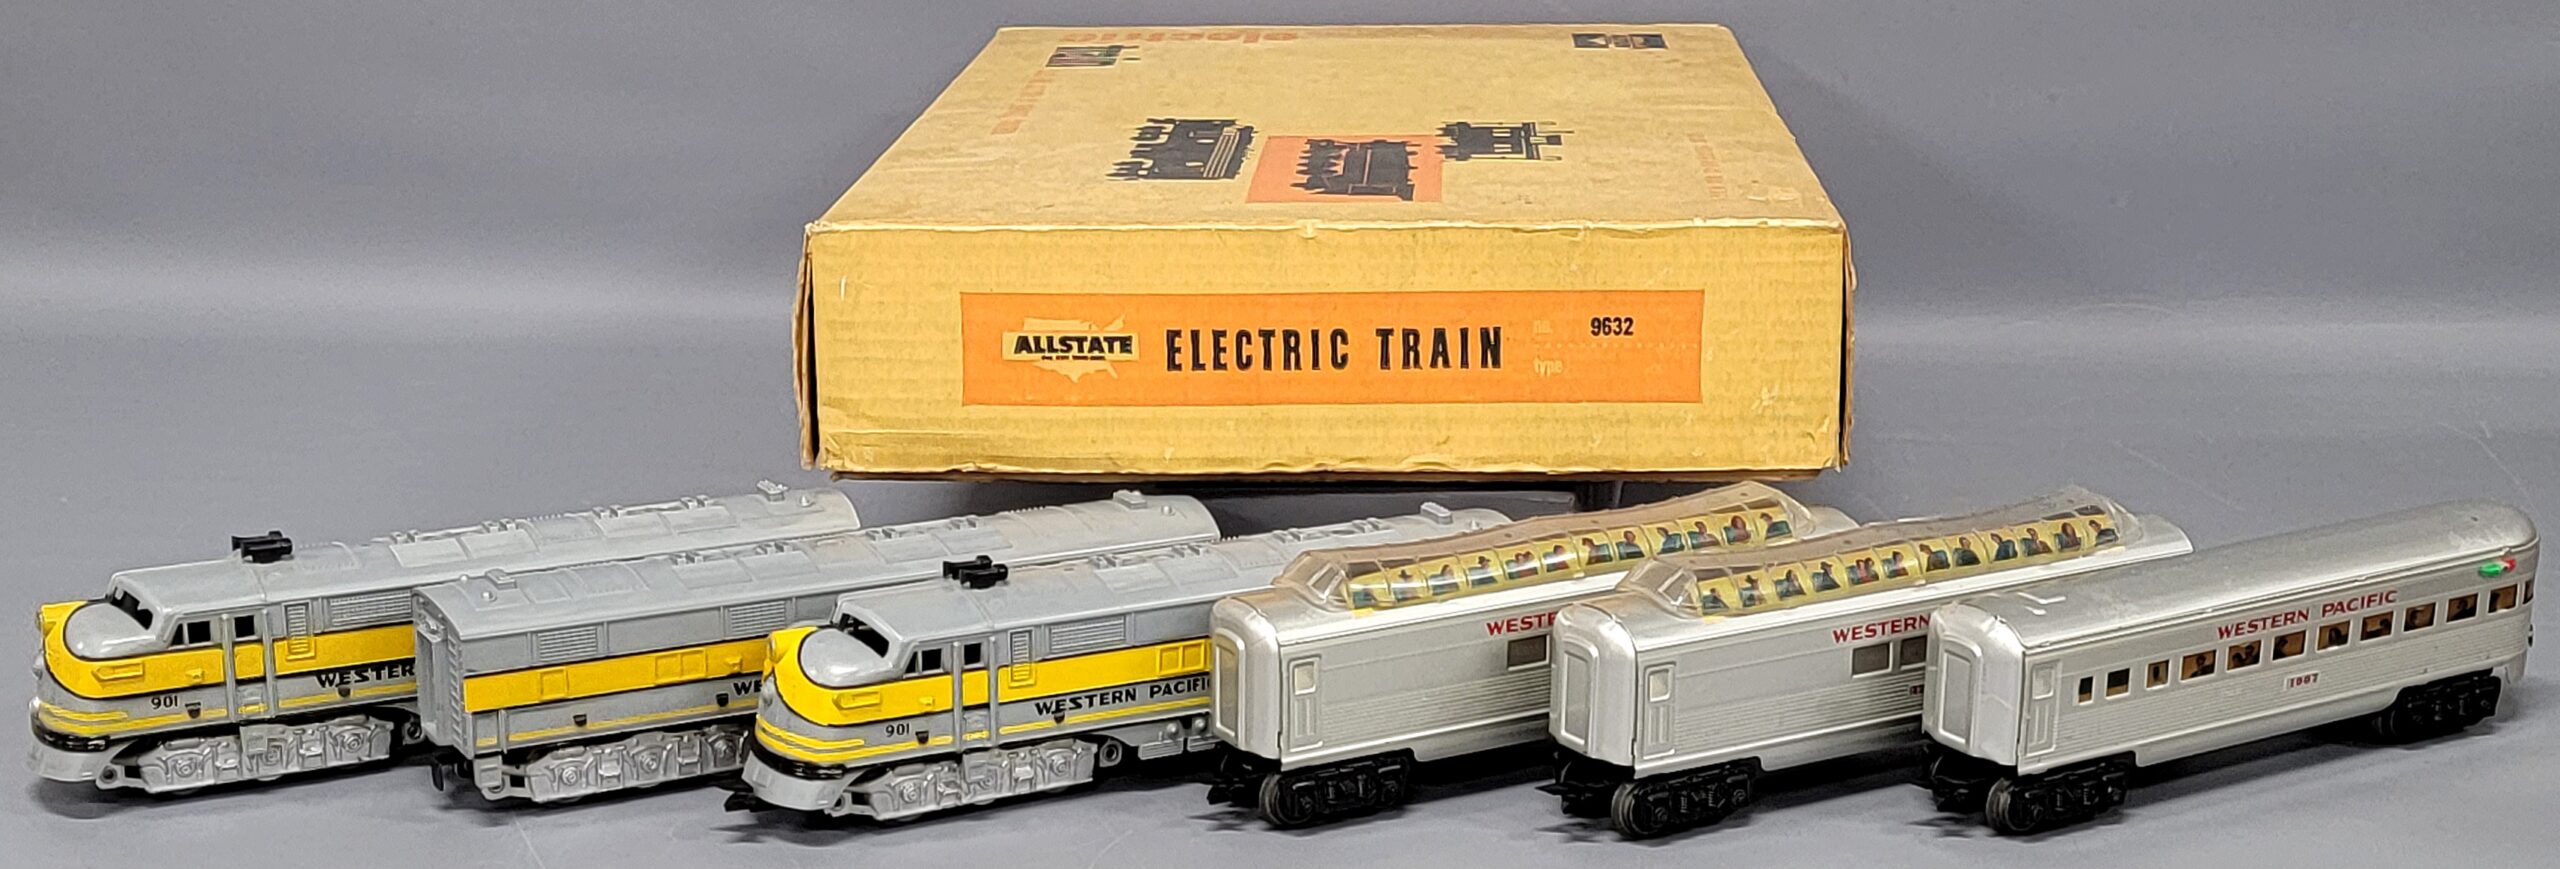 Only Auction Model And Toy Trains